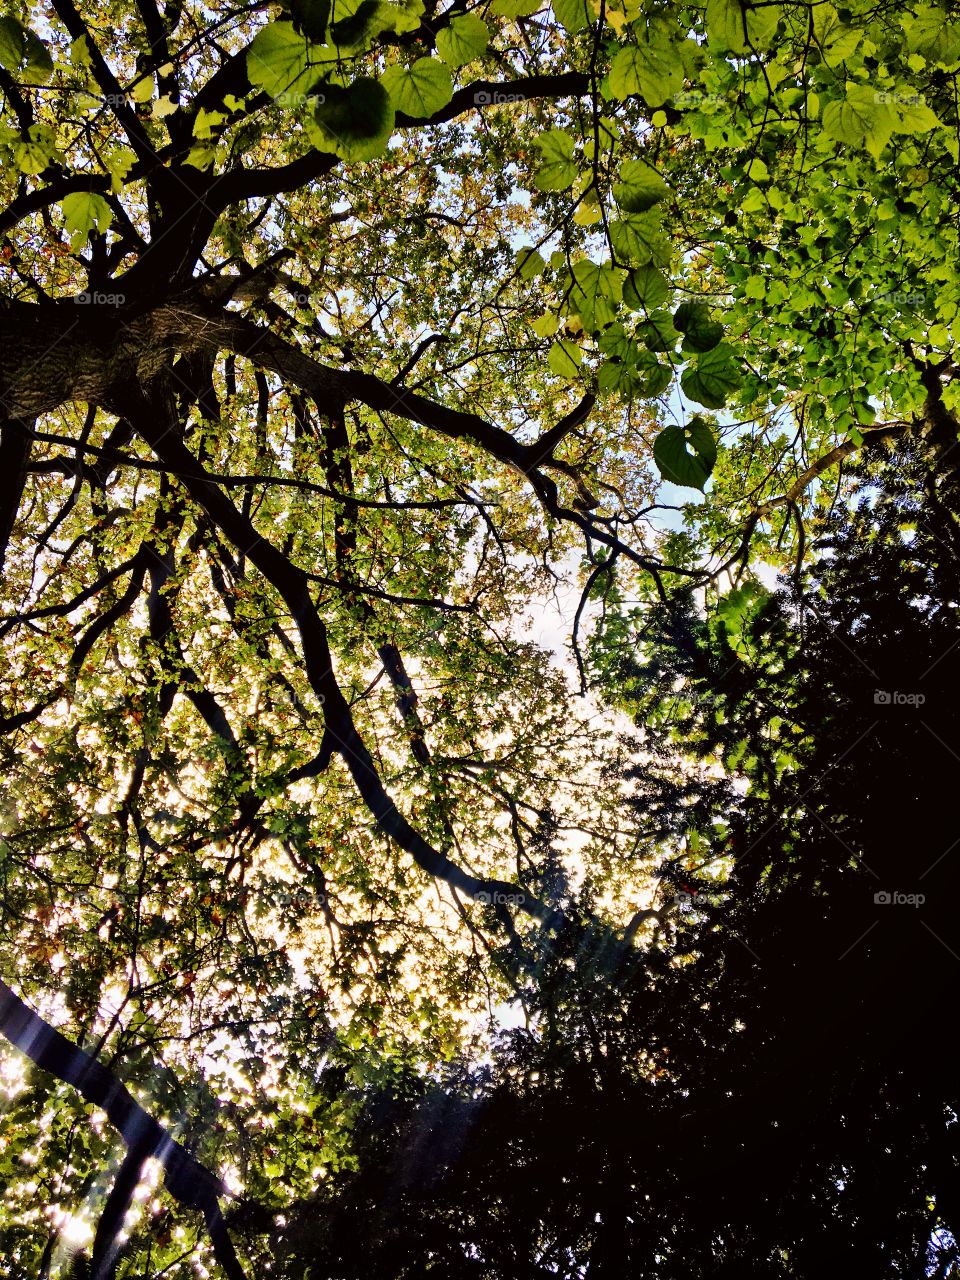 Looking up in the woods